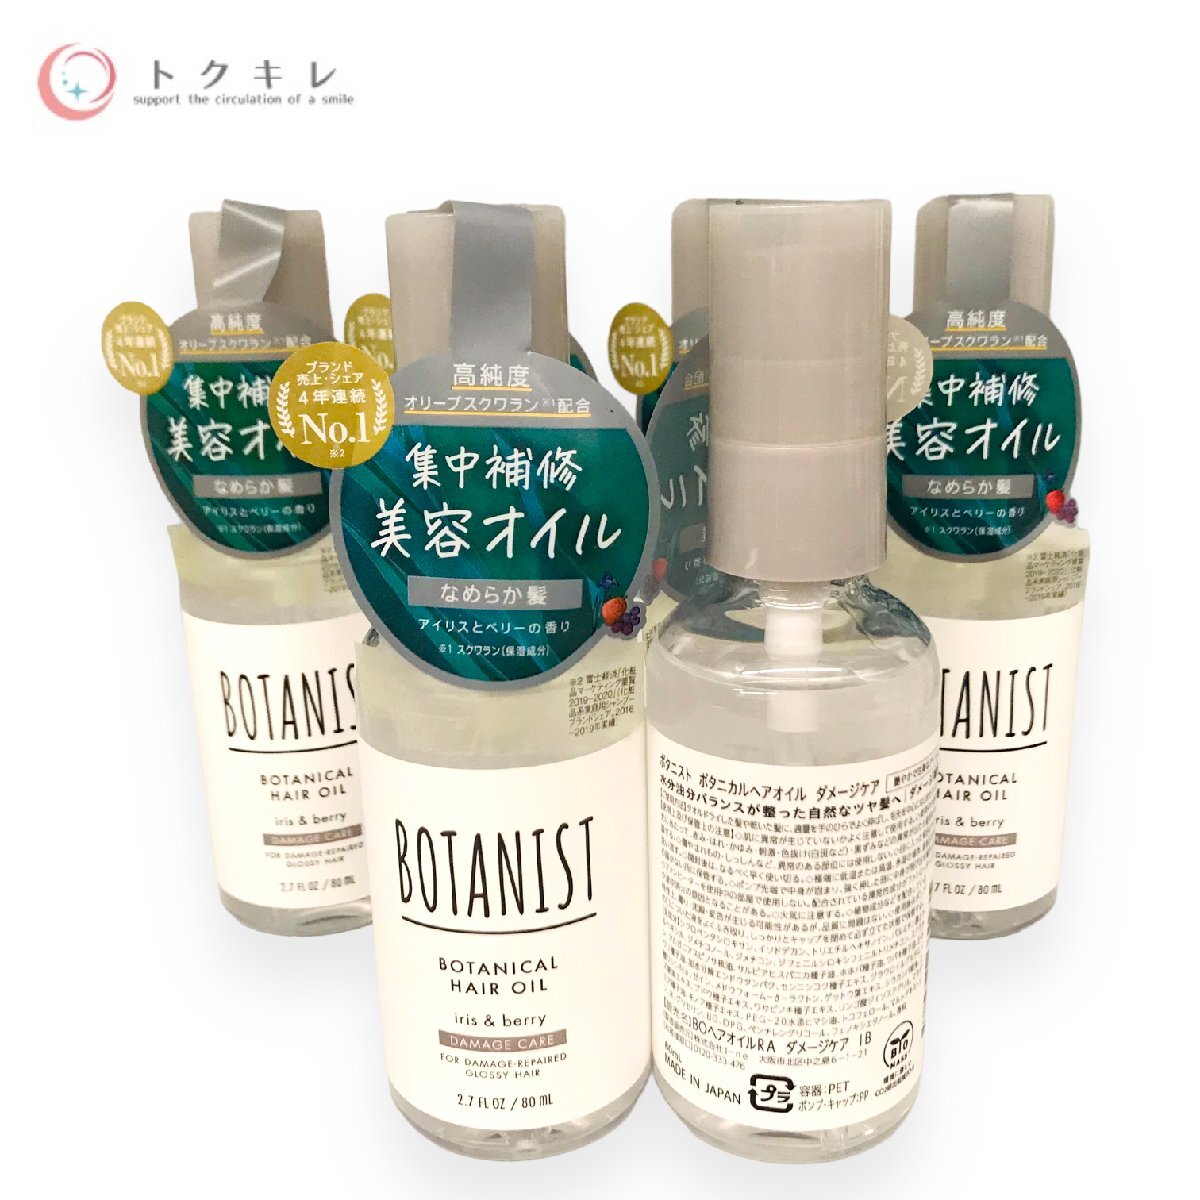 !1 jpy start free shipping cosme hair care large amount 44 point set botani -stroke hair milk and bai rom and mellow Korea cosme resale .